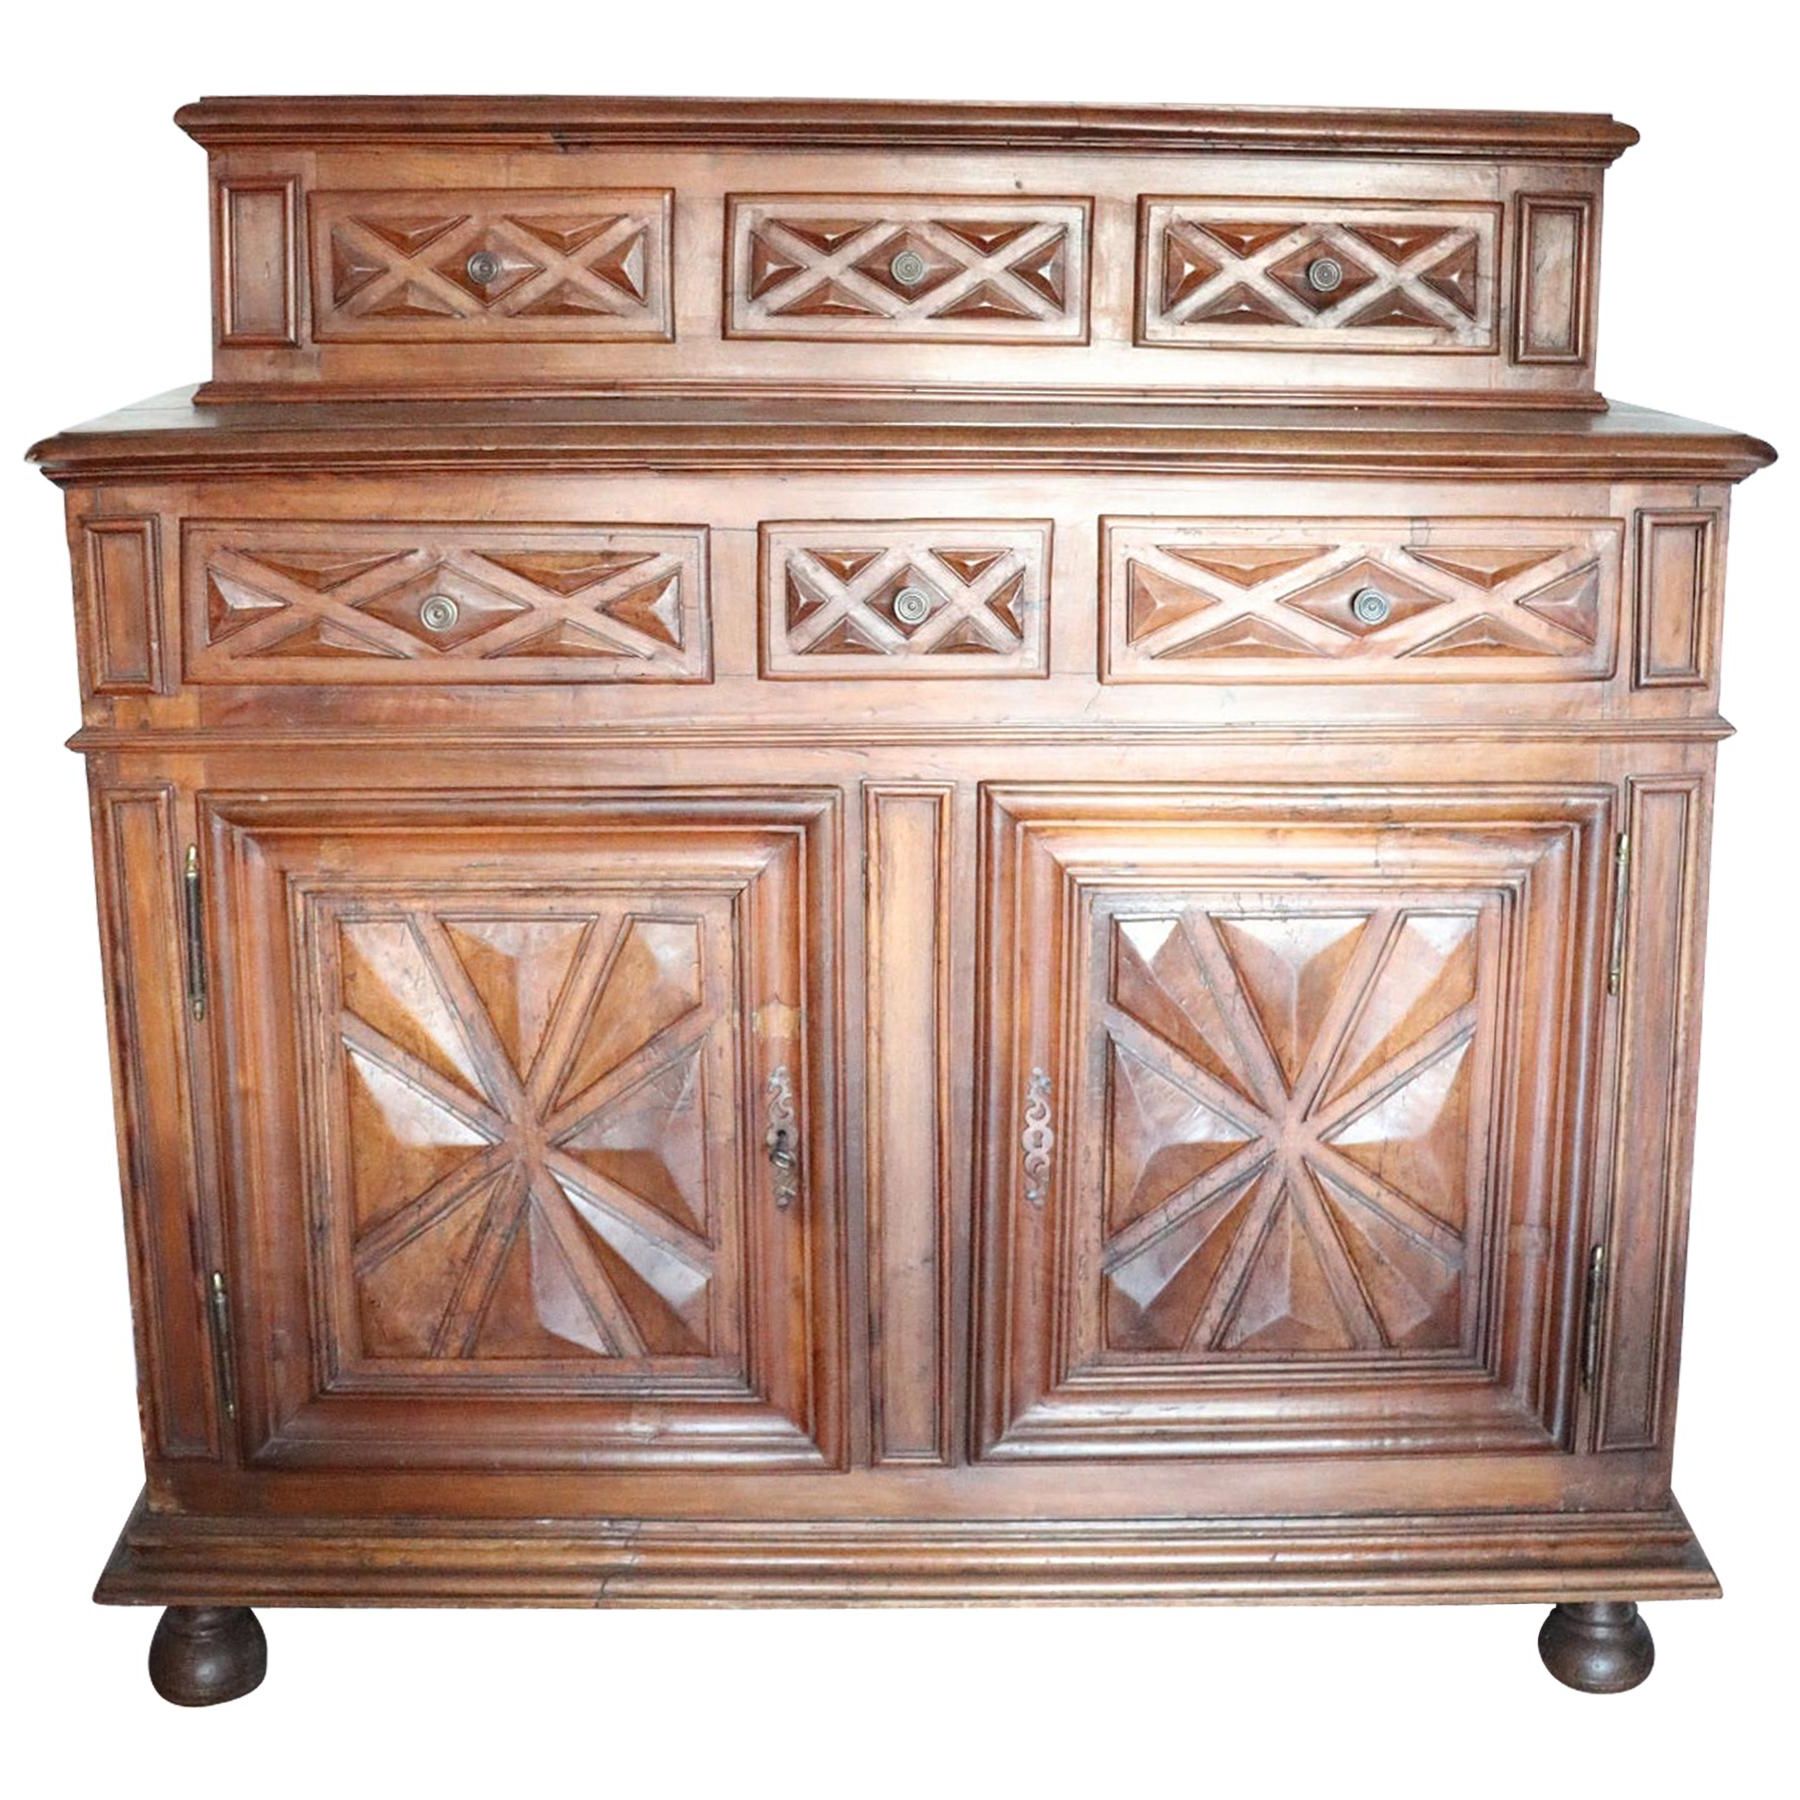 Most Recently Released 17th Century Italian Walnut Wood Large Rustic Sideboard, Buffet Or Credenza  At 1stdibs (View 9 of 15)